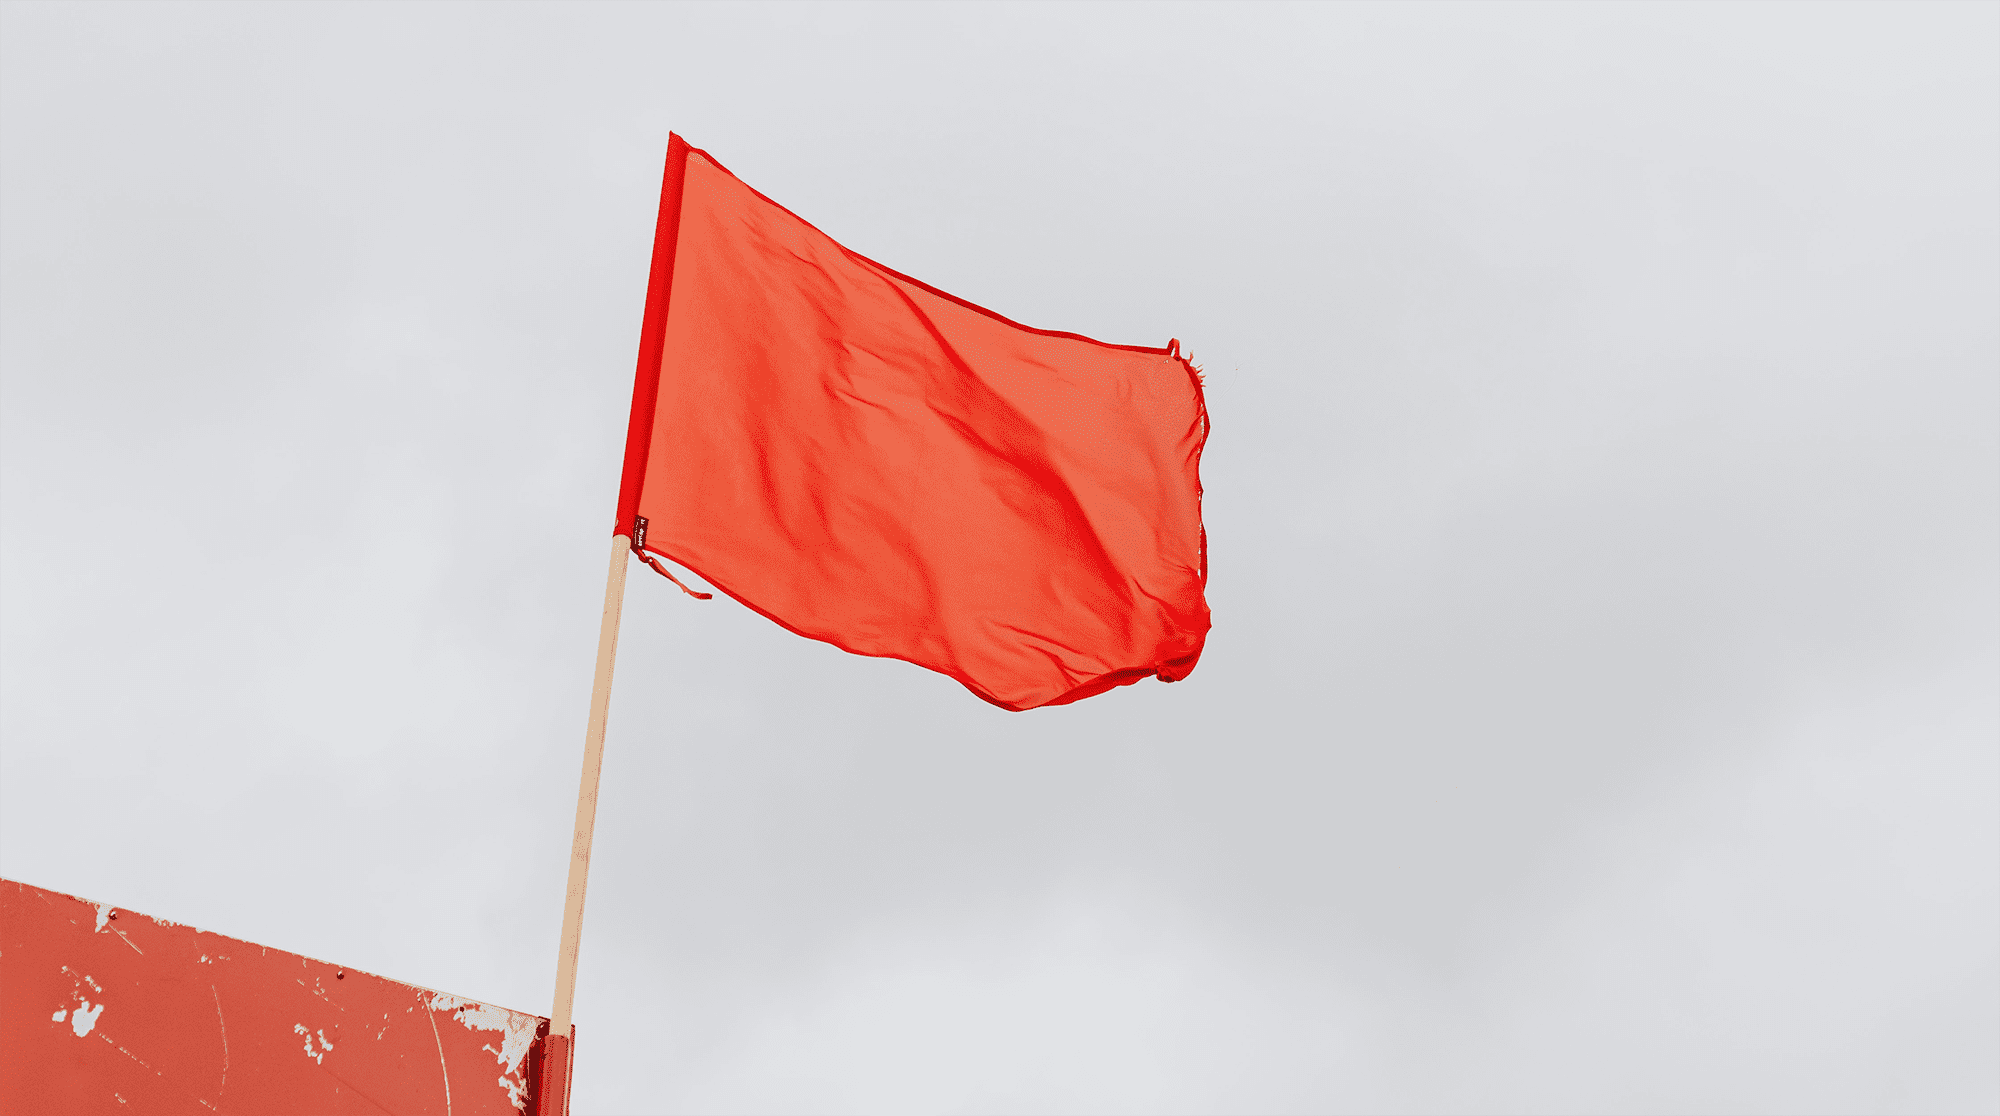 red-flag-waving-in-the-wind